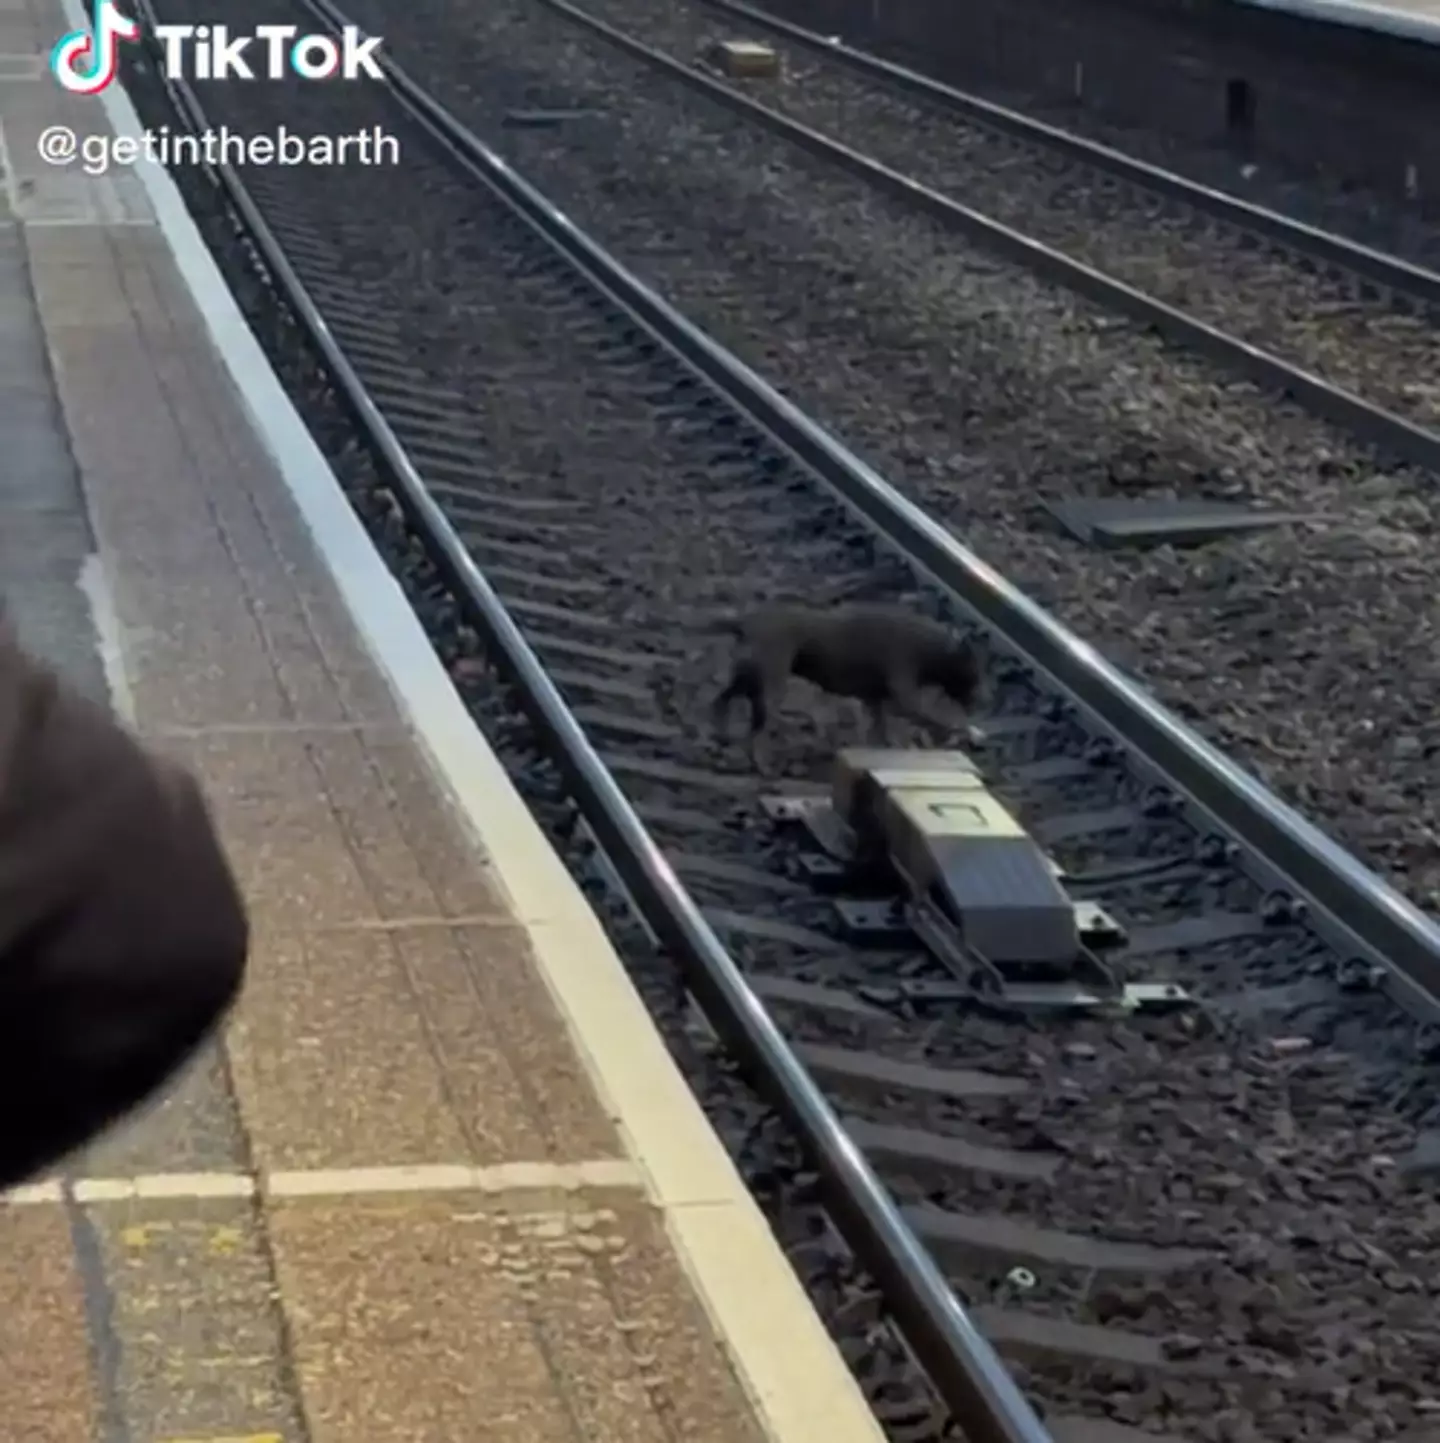 The dog got into difficulties on the train track.